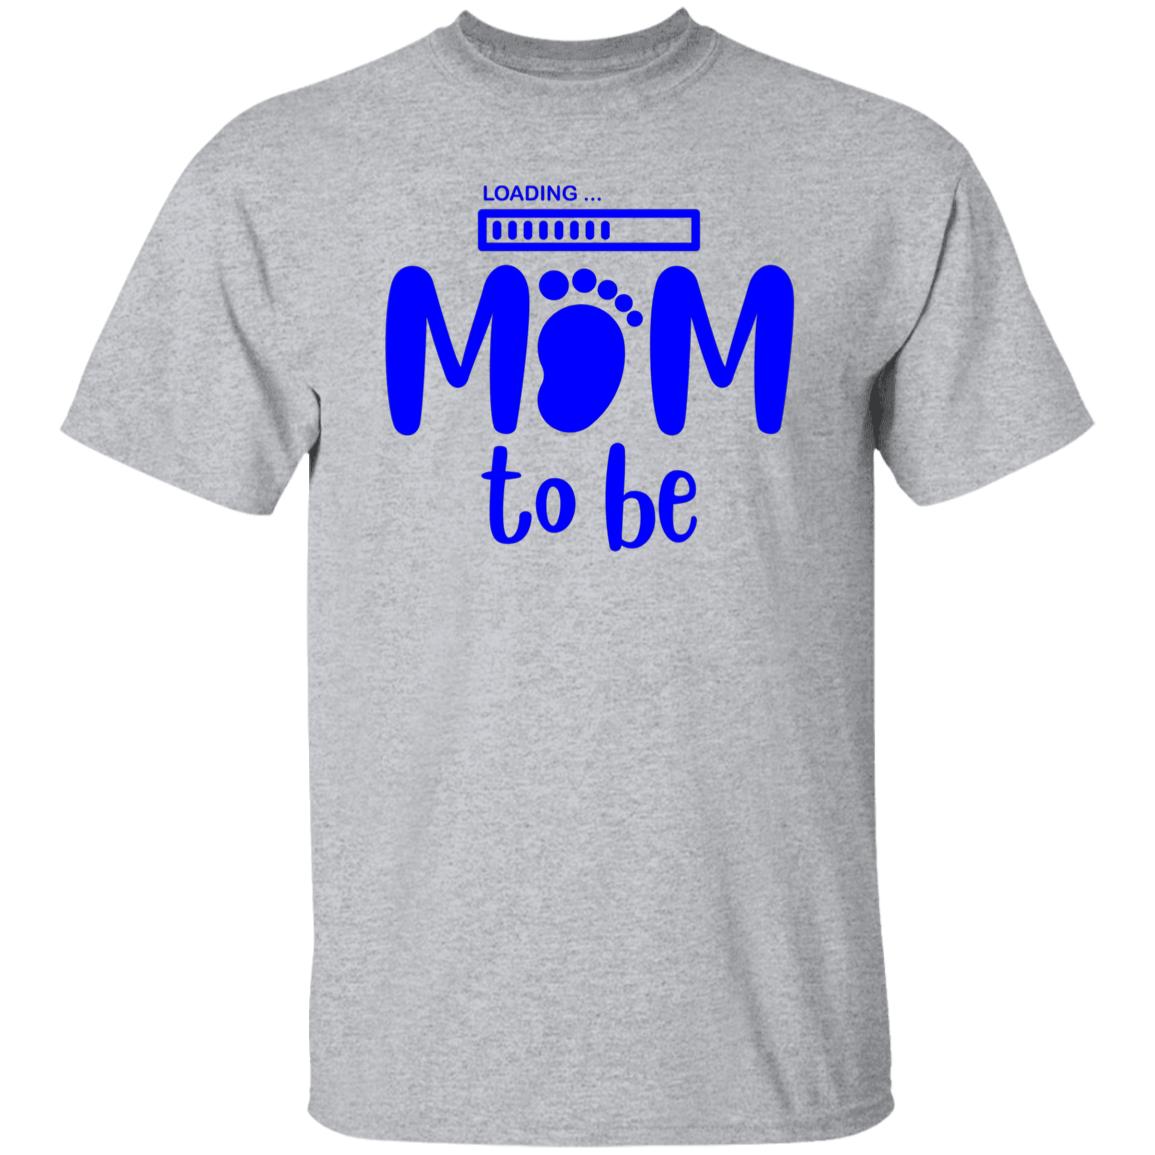 Mom to be (Blue Print)